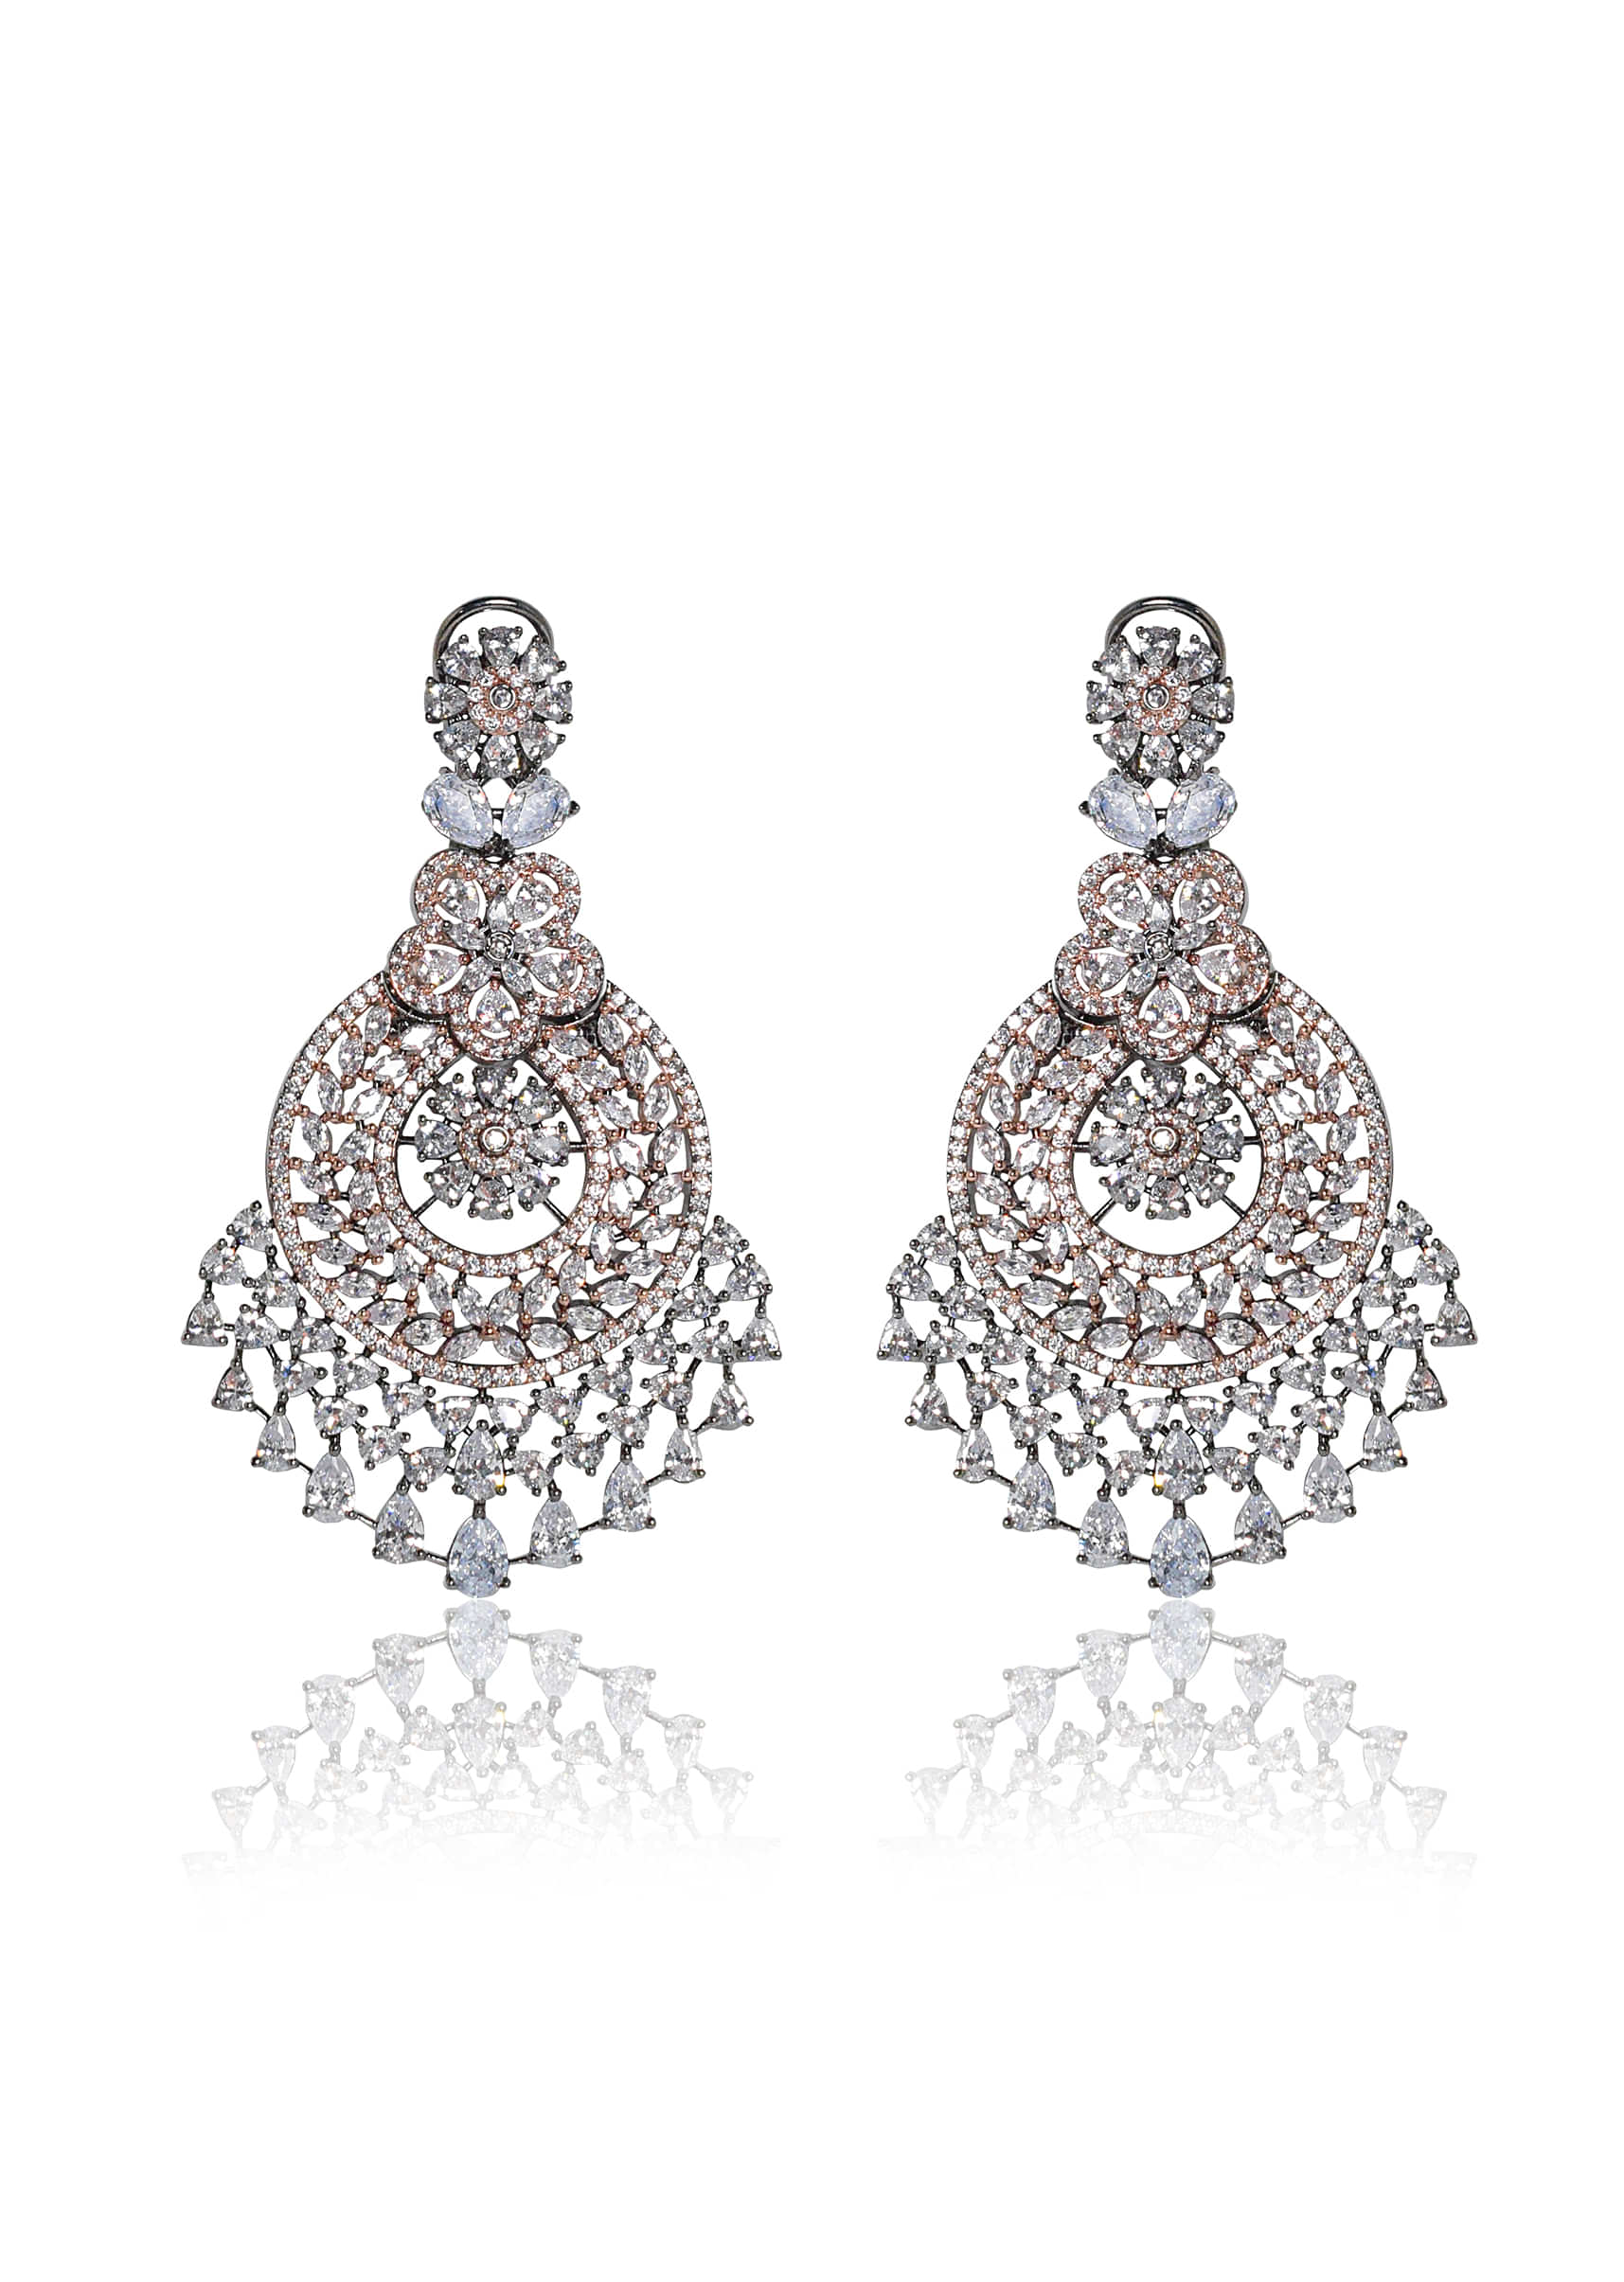 Rose Gold And Black Antique Finish Chandelier Earrings Studded With Faux Diamonds By Tizora